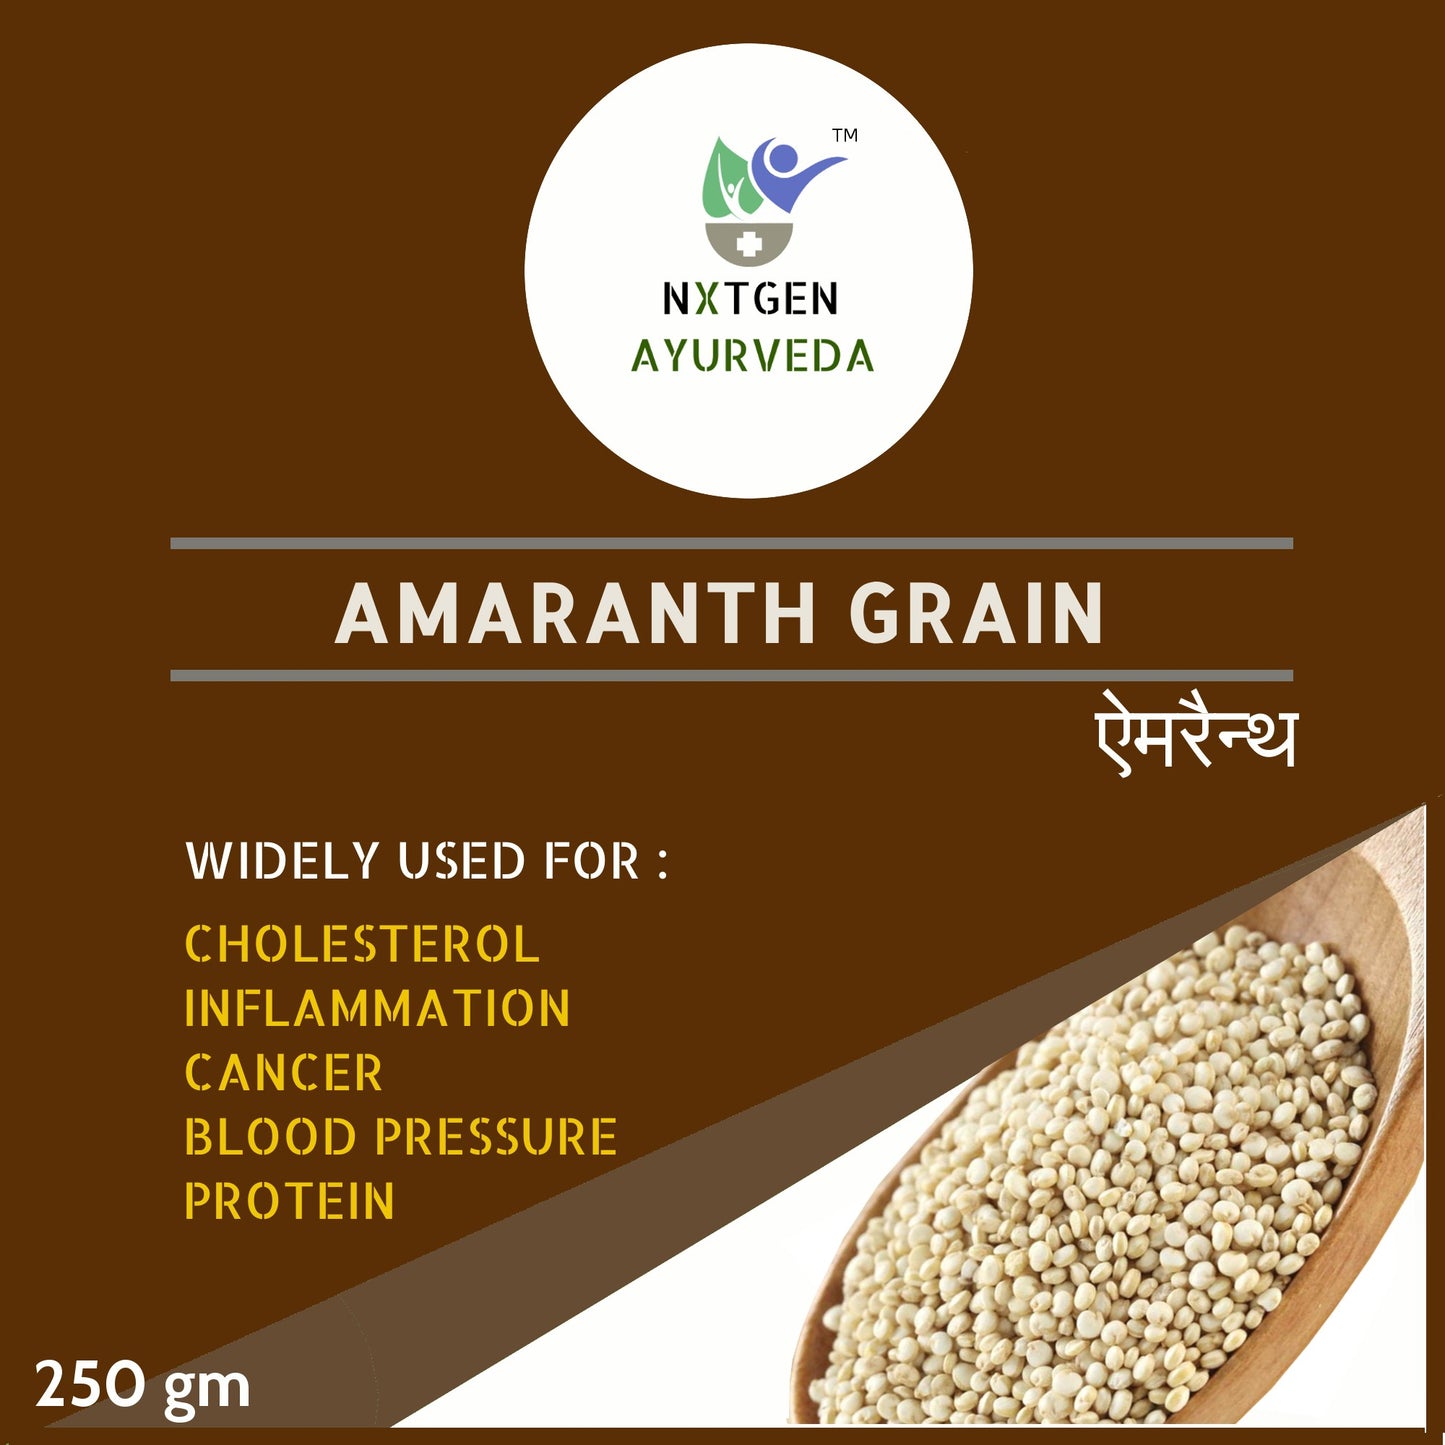  Amaranth is a great source of protein